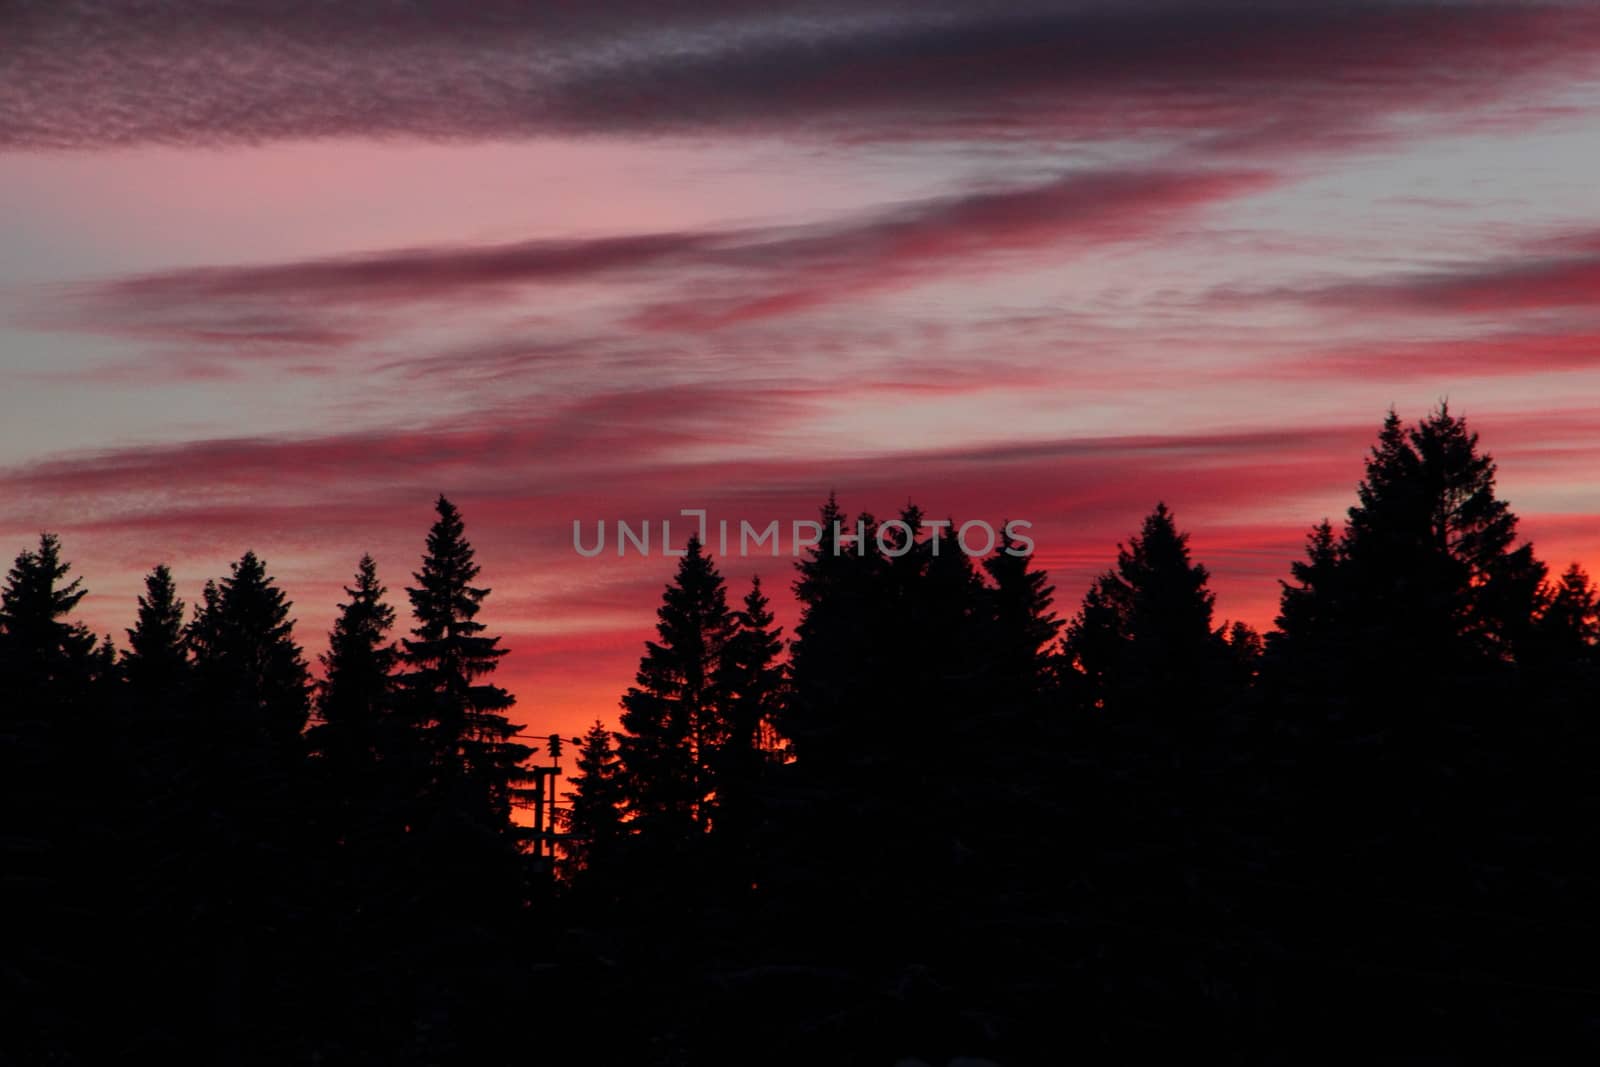 Multicolored bright sunset over the tops of spruce trees